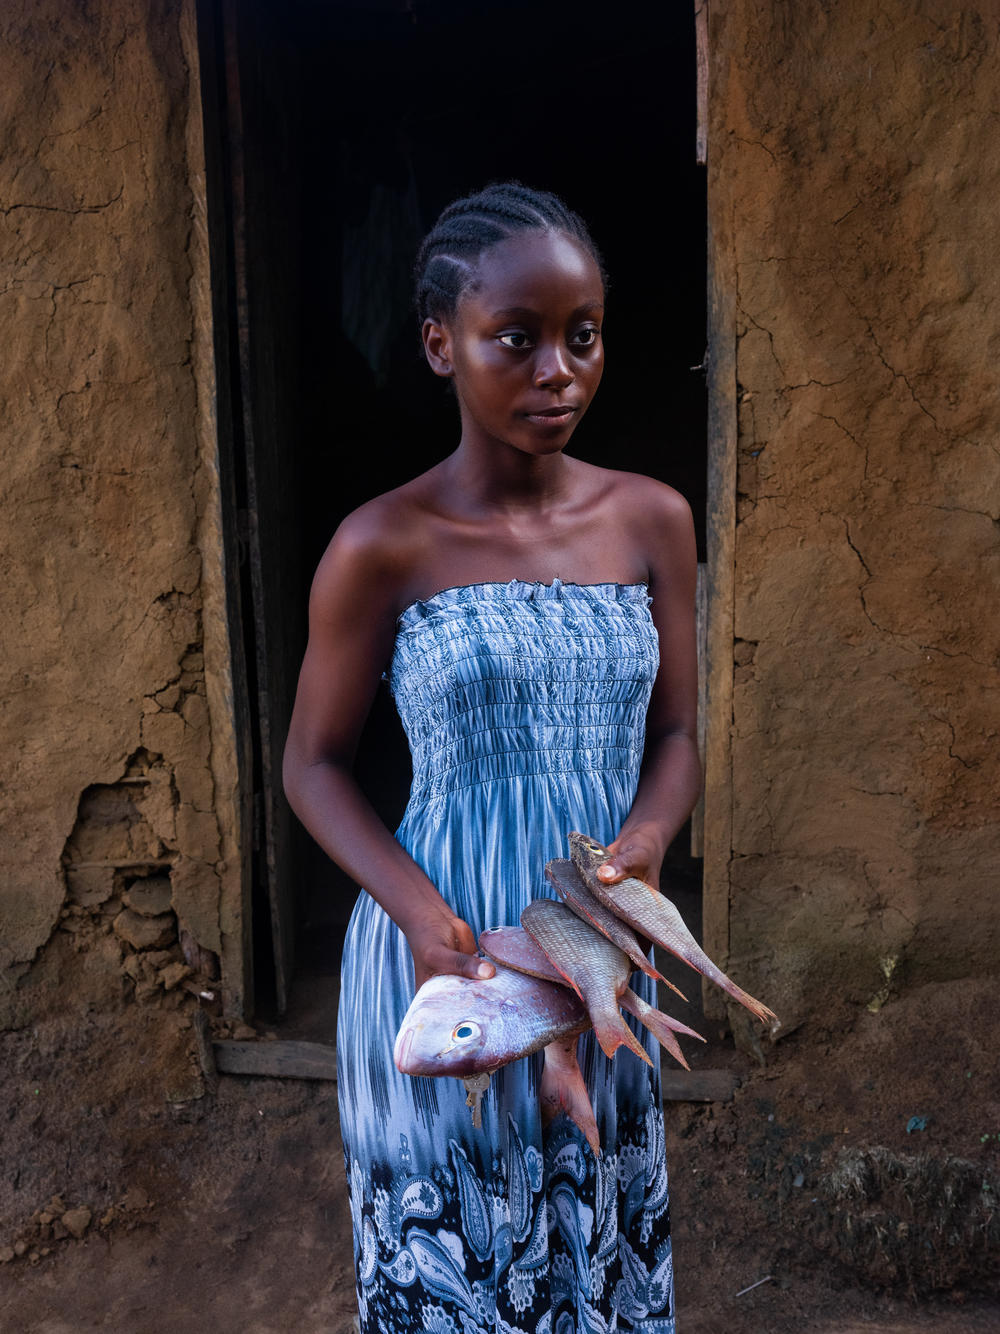 Maimouna brings back fish to cook for dinner in Barconie, Liberia, on Nov. 16, 2022.